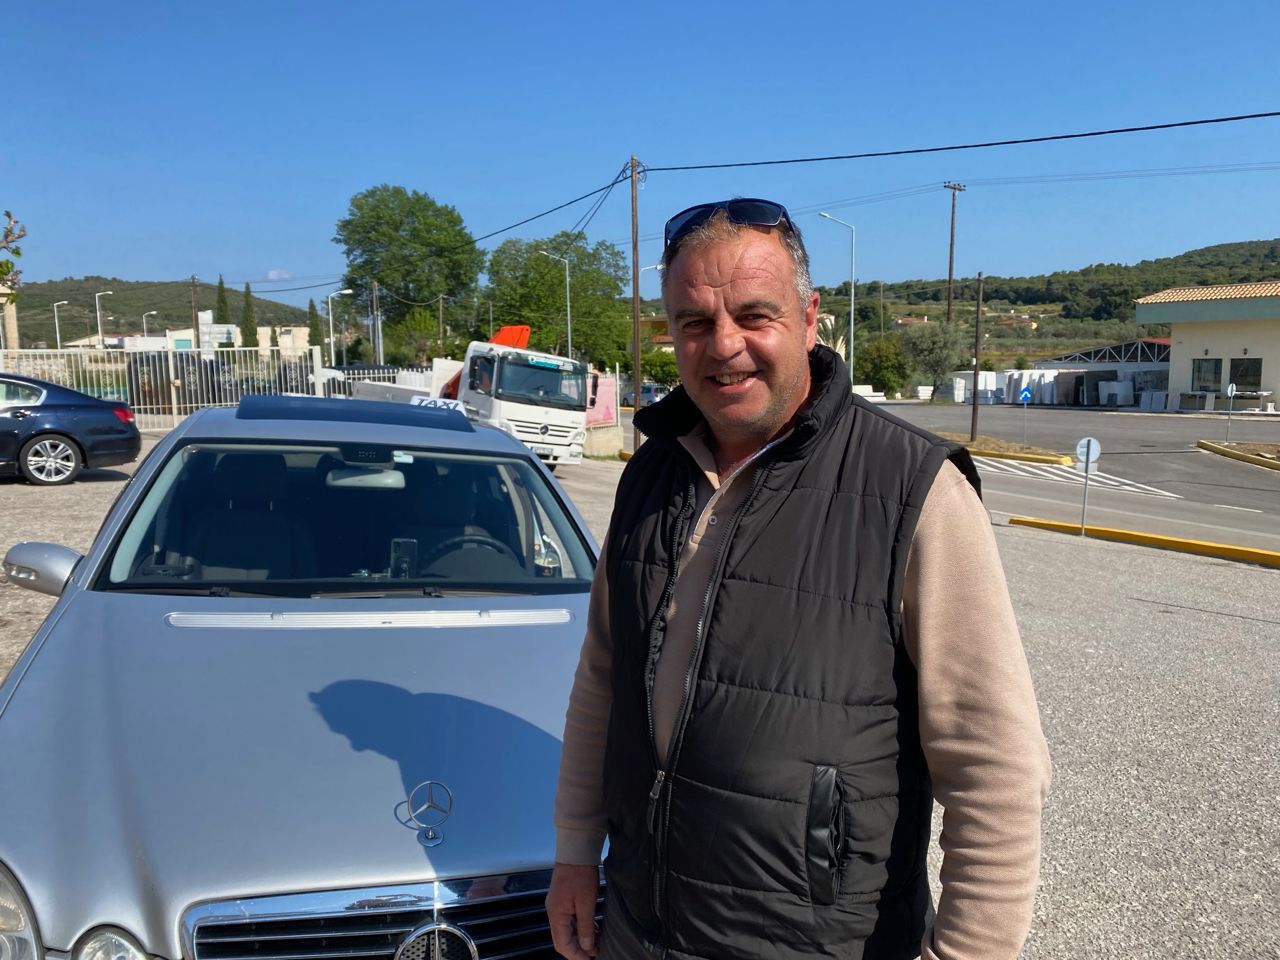 Ermioni Taxi Driver, Panagiotis Develekos, recommended by Hydradirect.